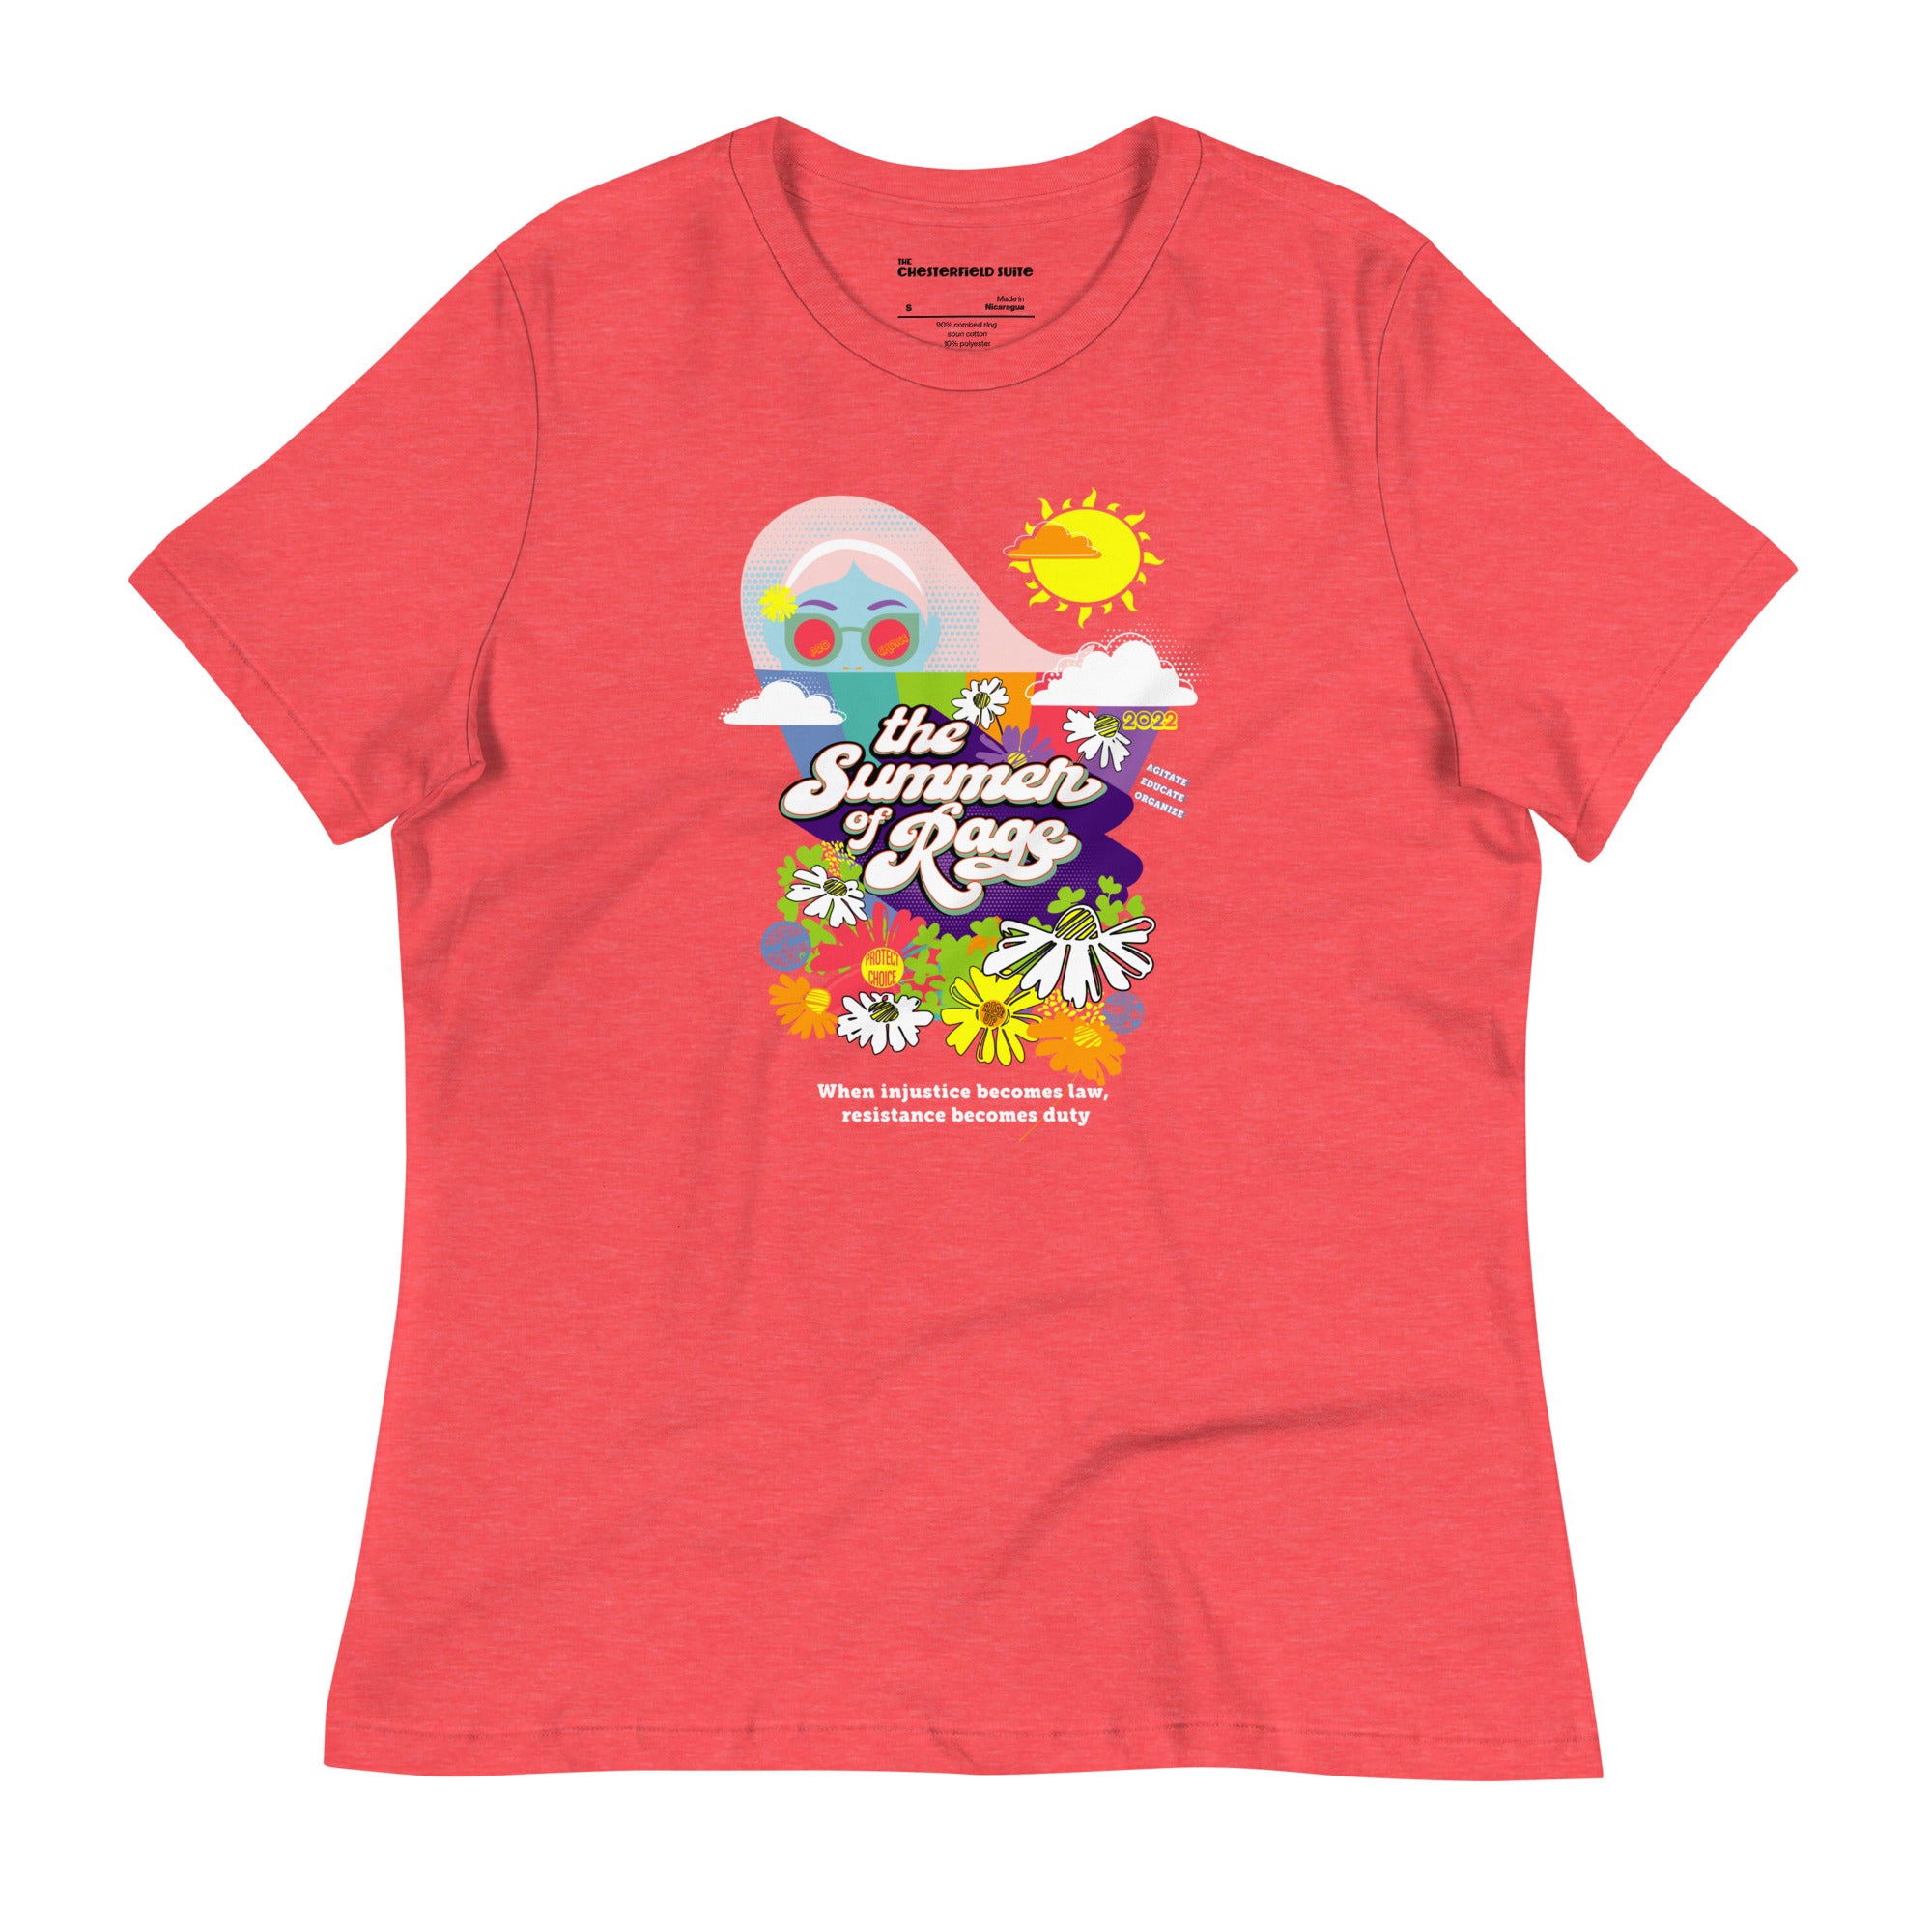 Red background t-shirt design with abortion rights saying, the summer of rage with flowers and sunshine roe v wade supreme court